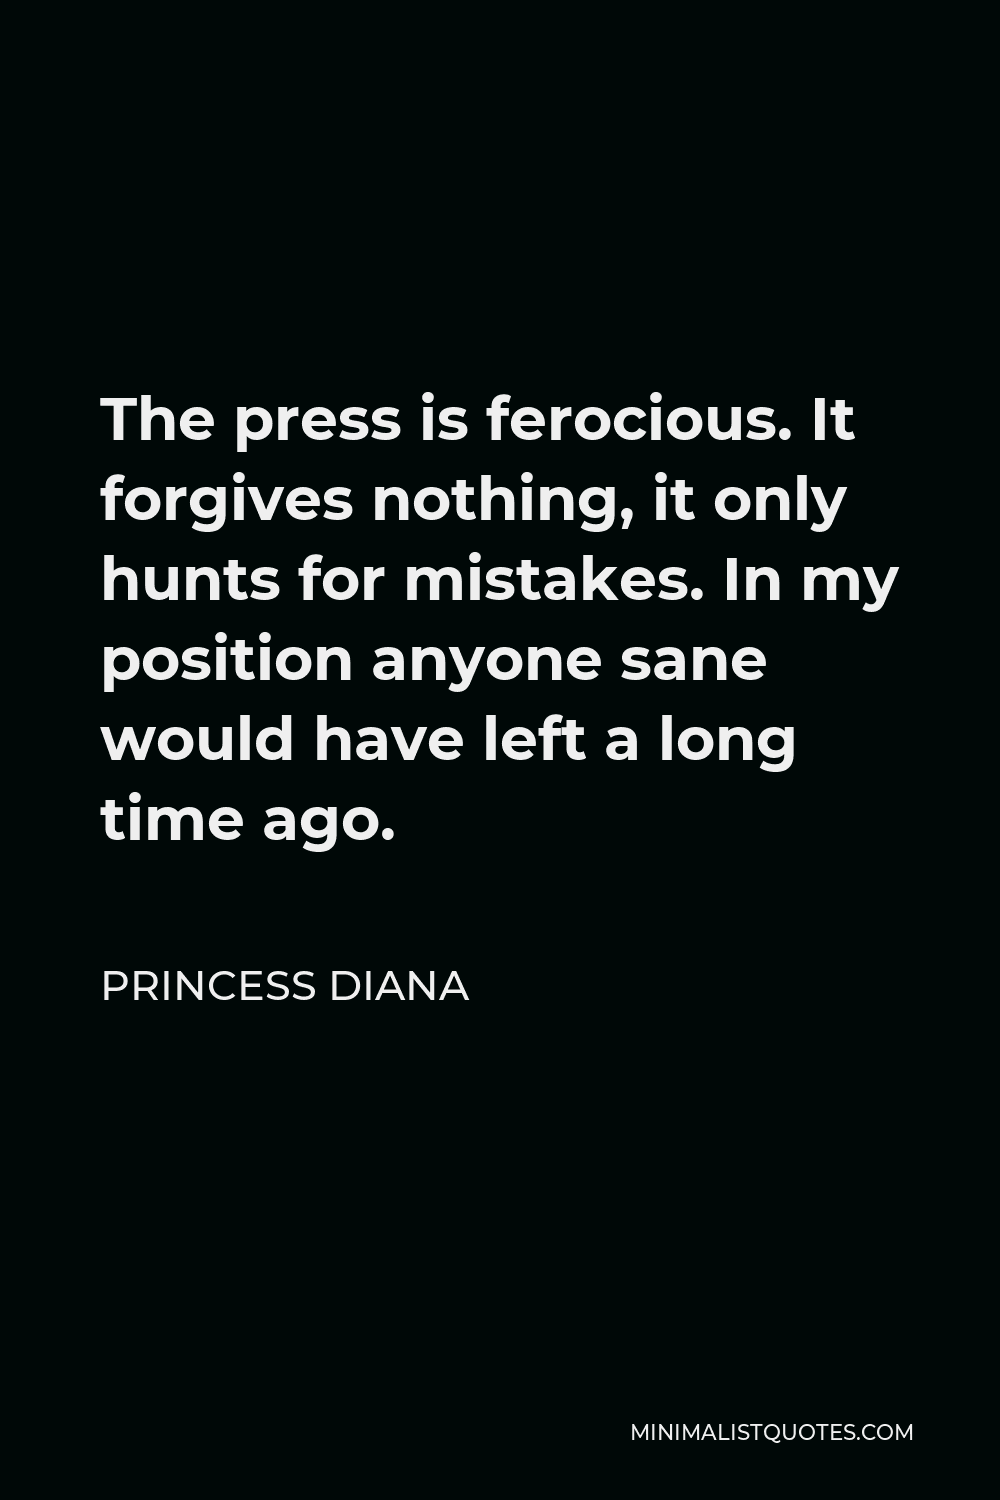 Princess Diana Quote - The press is ferocious. It forgives nothing, it only hunts for mistakes. In my position anyone sane would have left a long time ago.